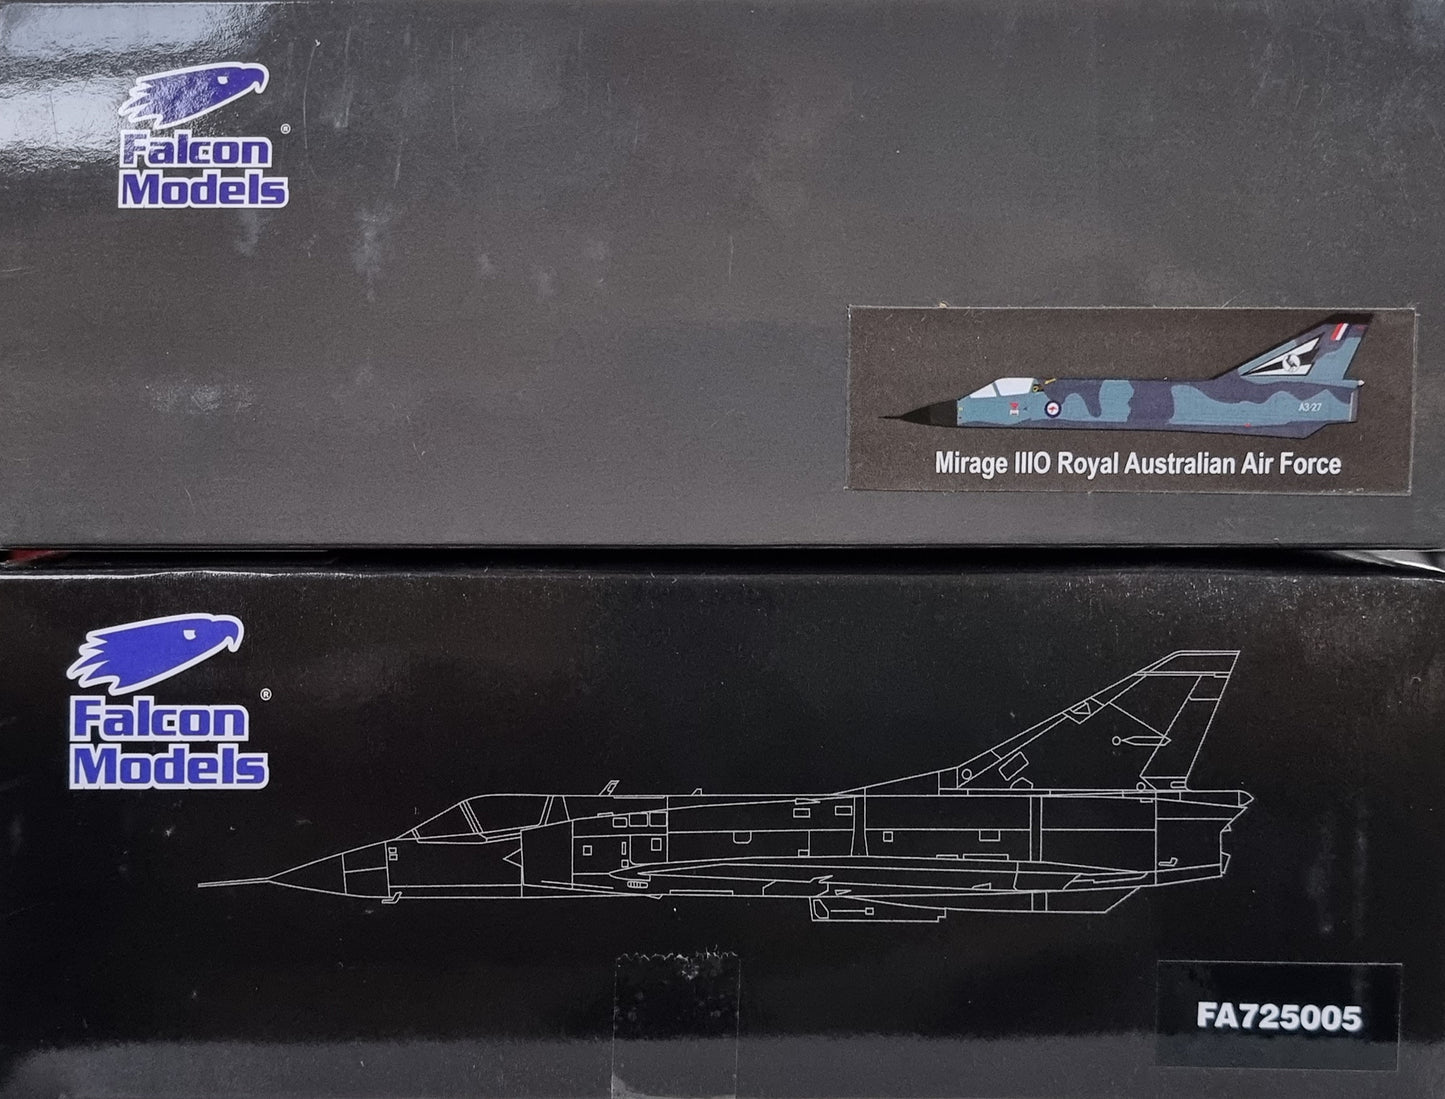 Falcon Models Wings of Fame 1:72 FA725005 Mirage IIIO Royal Australian Air Force Box never opened. - Chester Model Centre